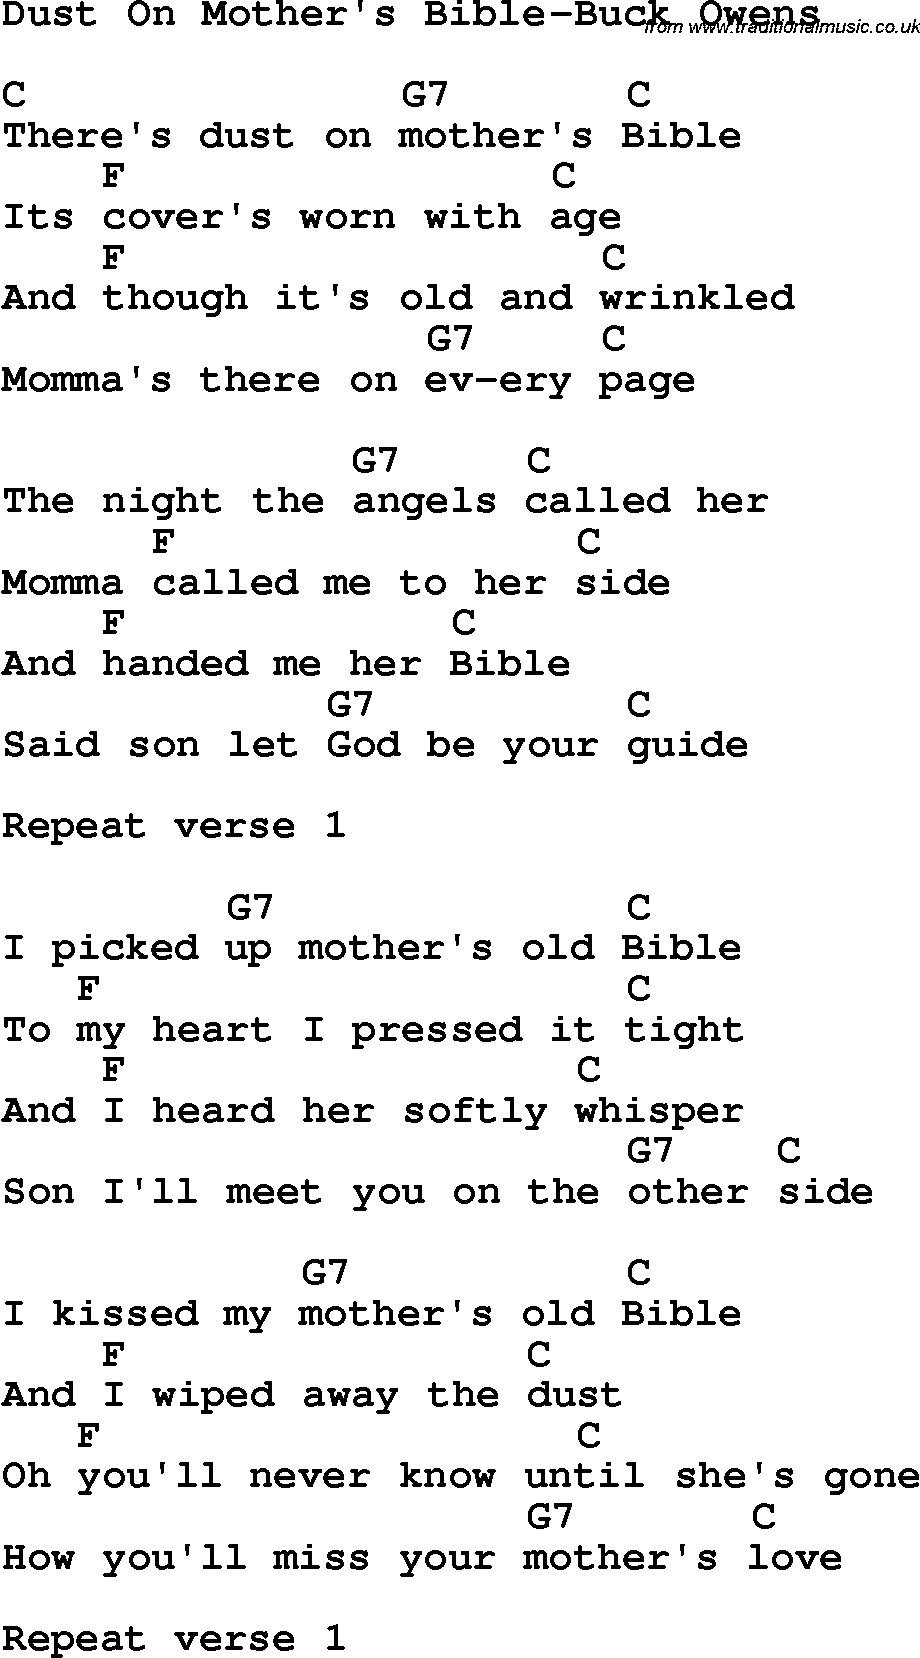 Country, Southern and Bluegrass Gospel Song Dust On Mother's Bible-Buck Owens lyrics and chords